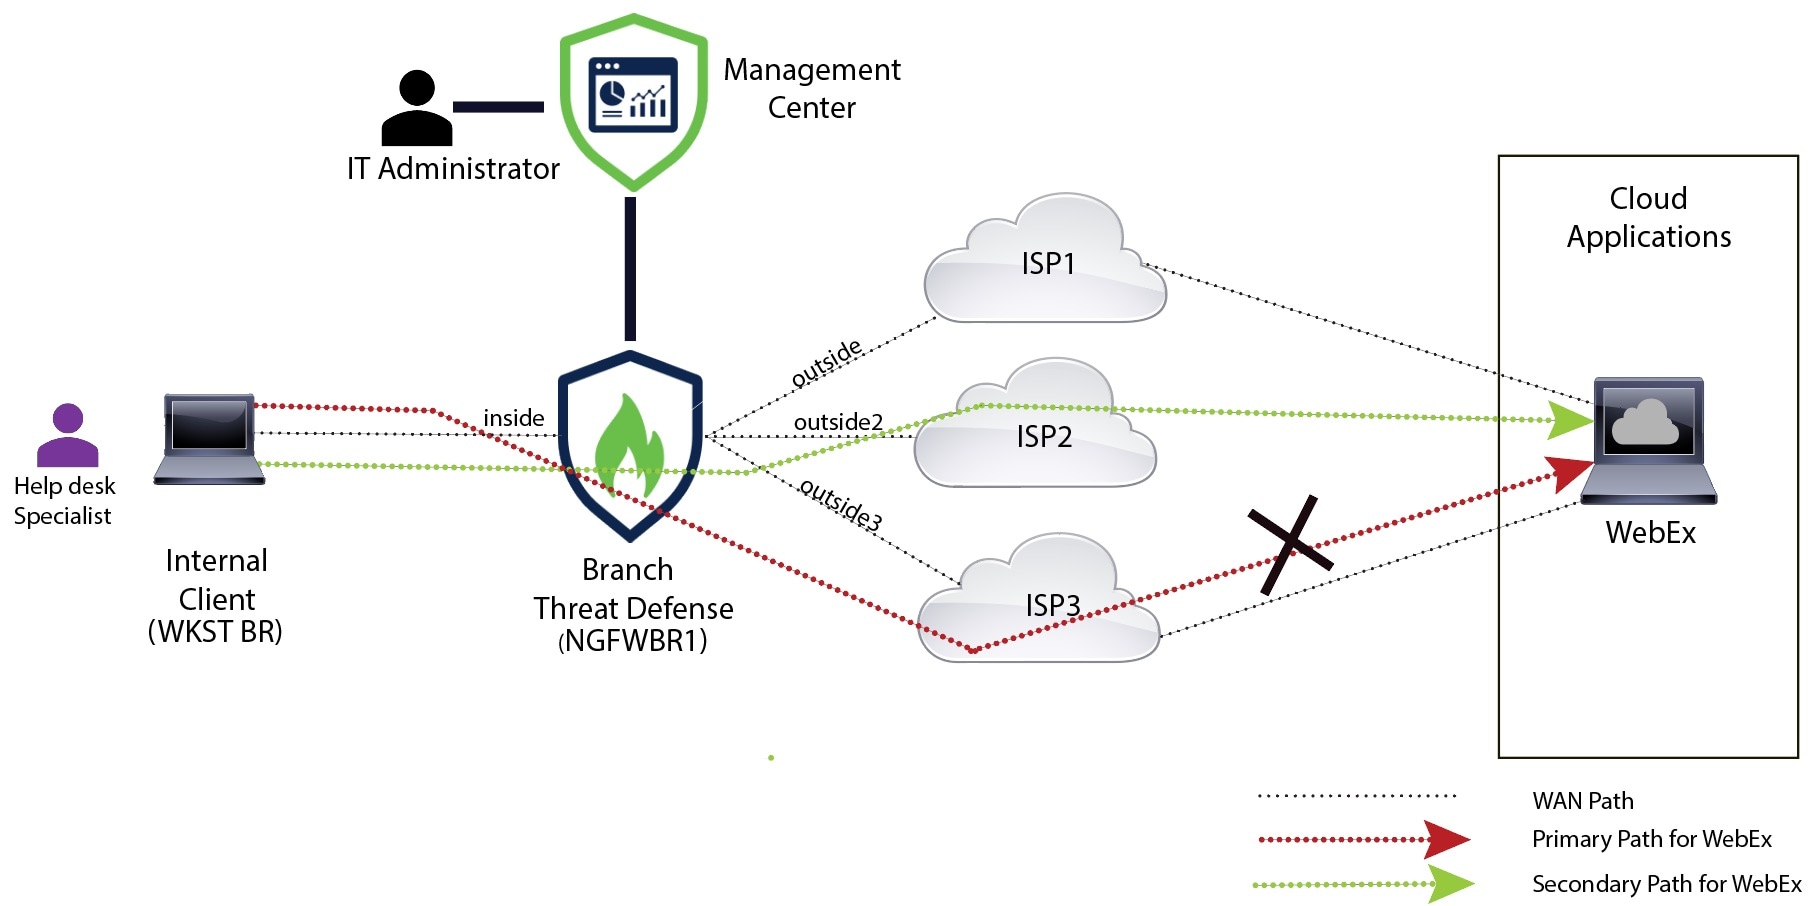 The image depicts the topology for Direct Internet Access with path monitoring